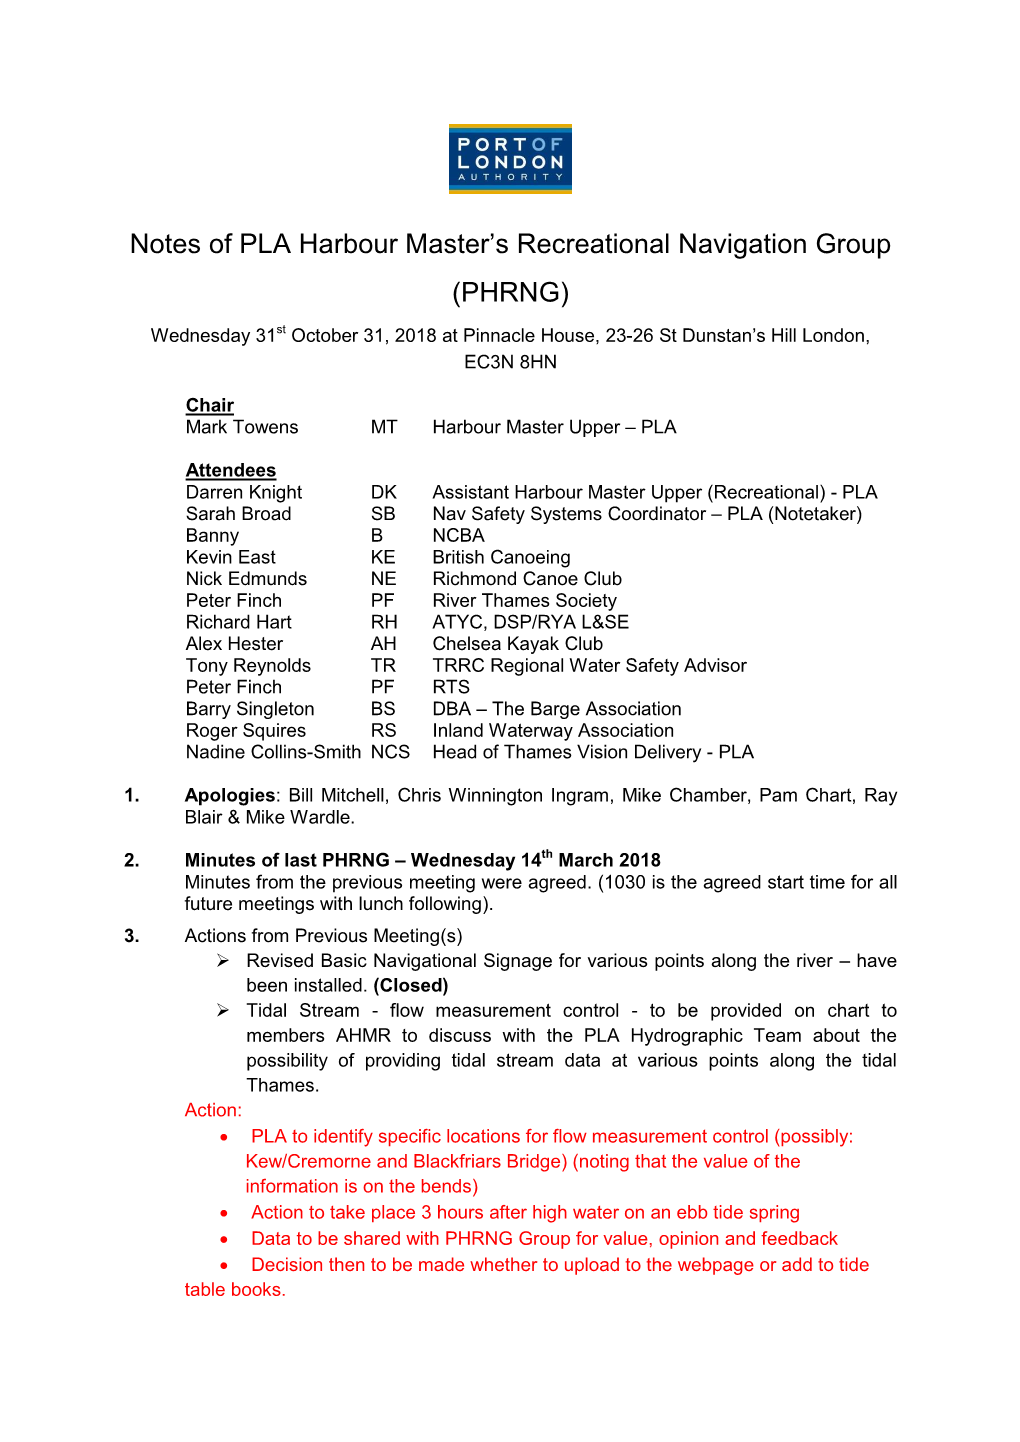 Notes of PLA Harbour Master's Recreational Navigation Group